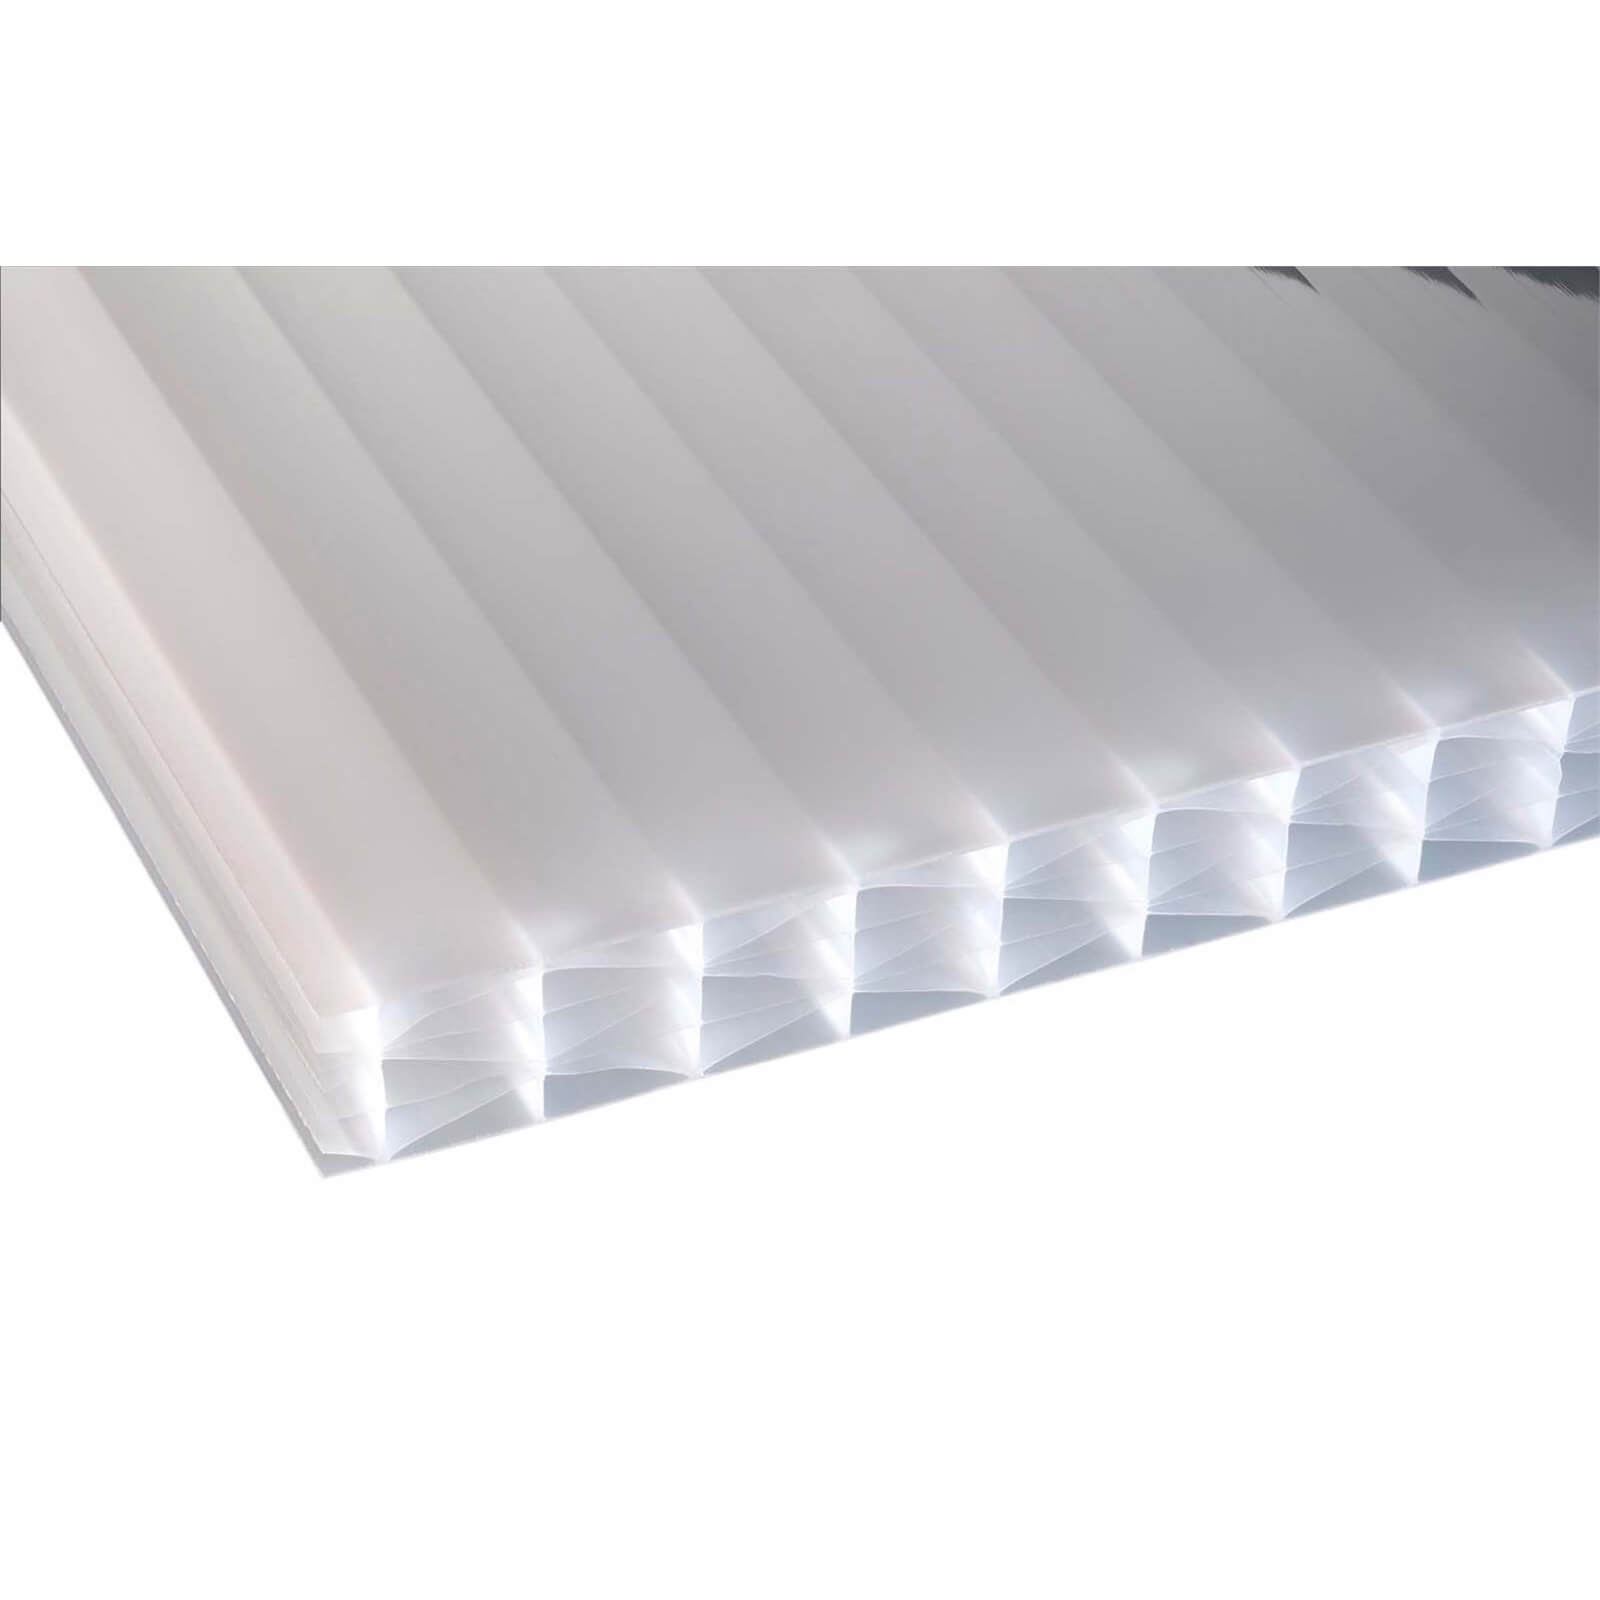 Photo of Corotherm Opal Roof Sheet 3000x1050x25mm - Pack 5